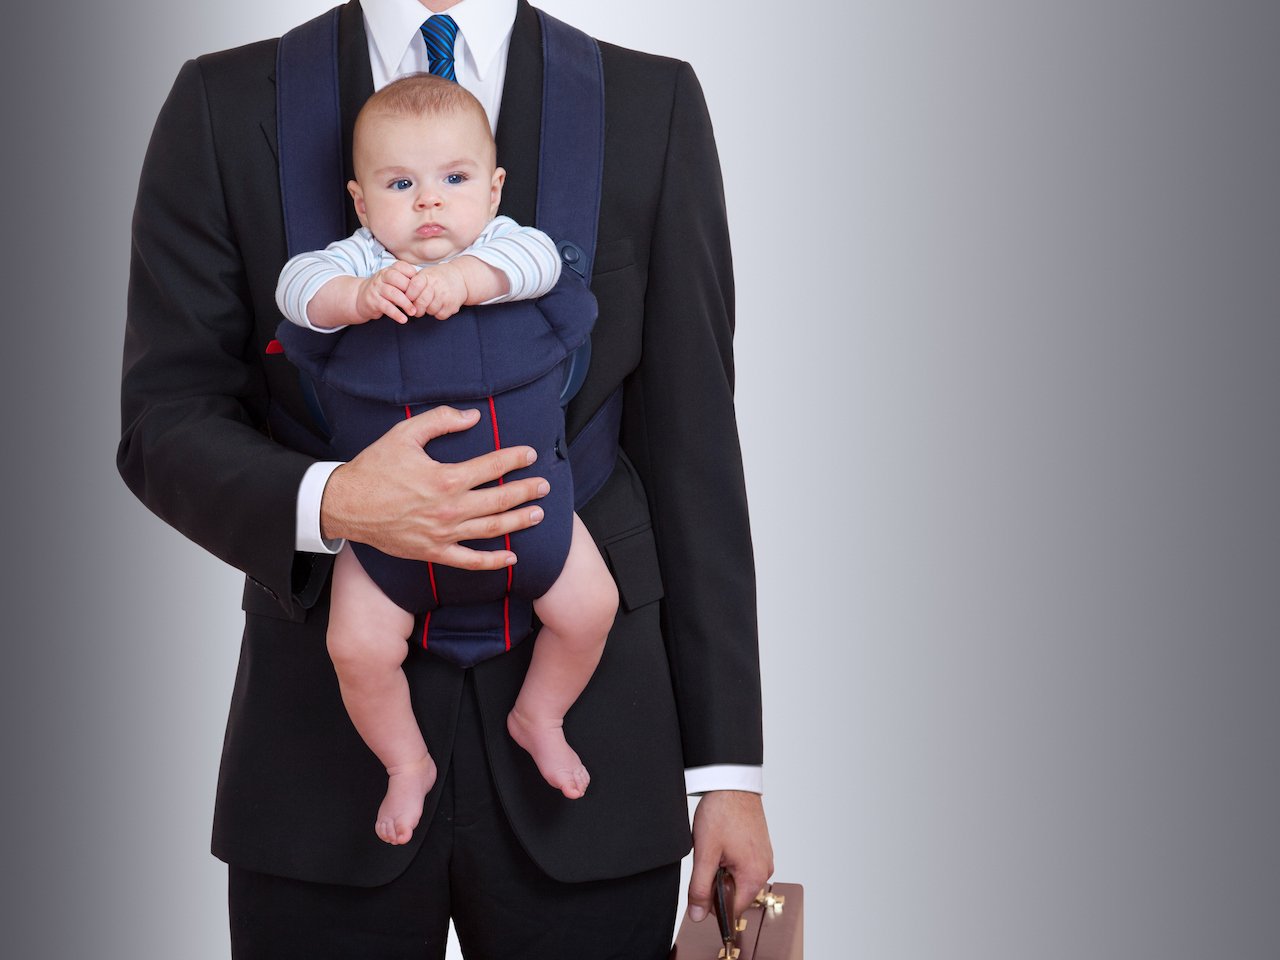 Image of a man in a suit holding a baby in a carrier, with the man's head missing